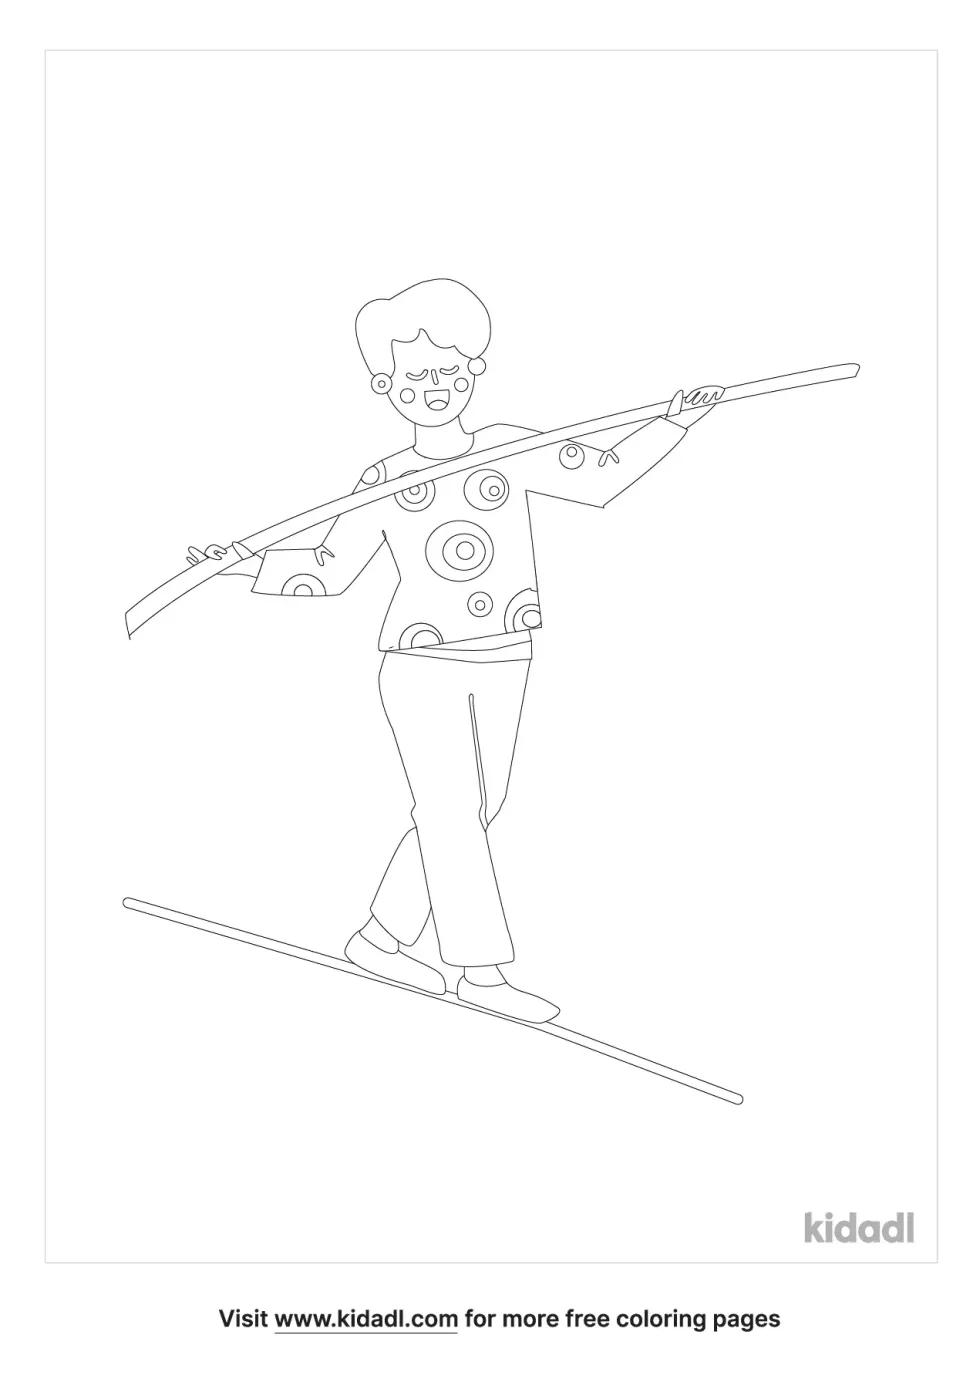 Balance And Motion Coloring Page